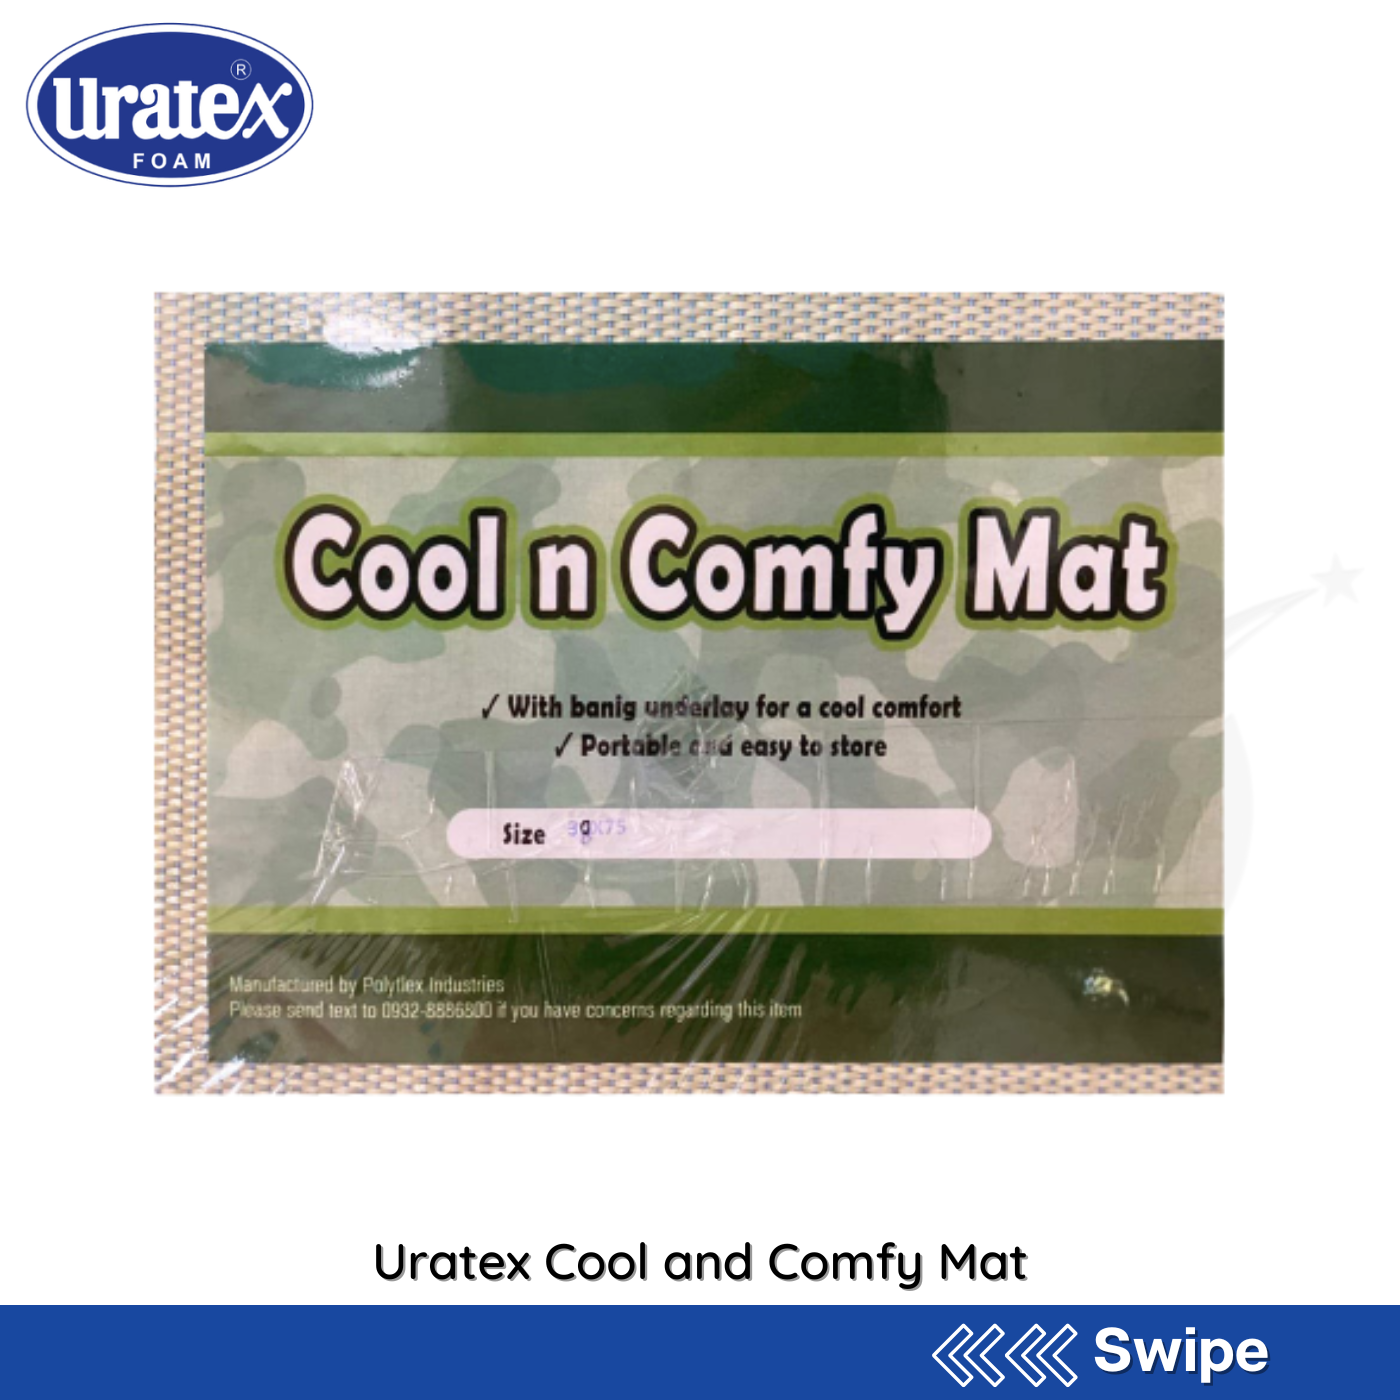 Uratex Cool and Comfy Mat - People's Choice Marketing